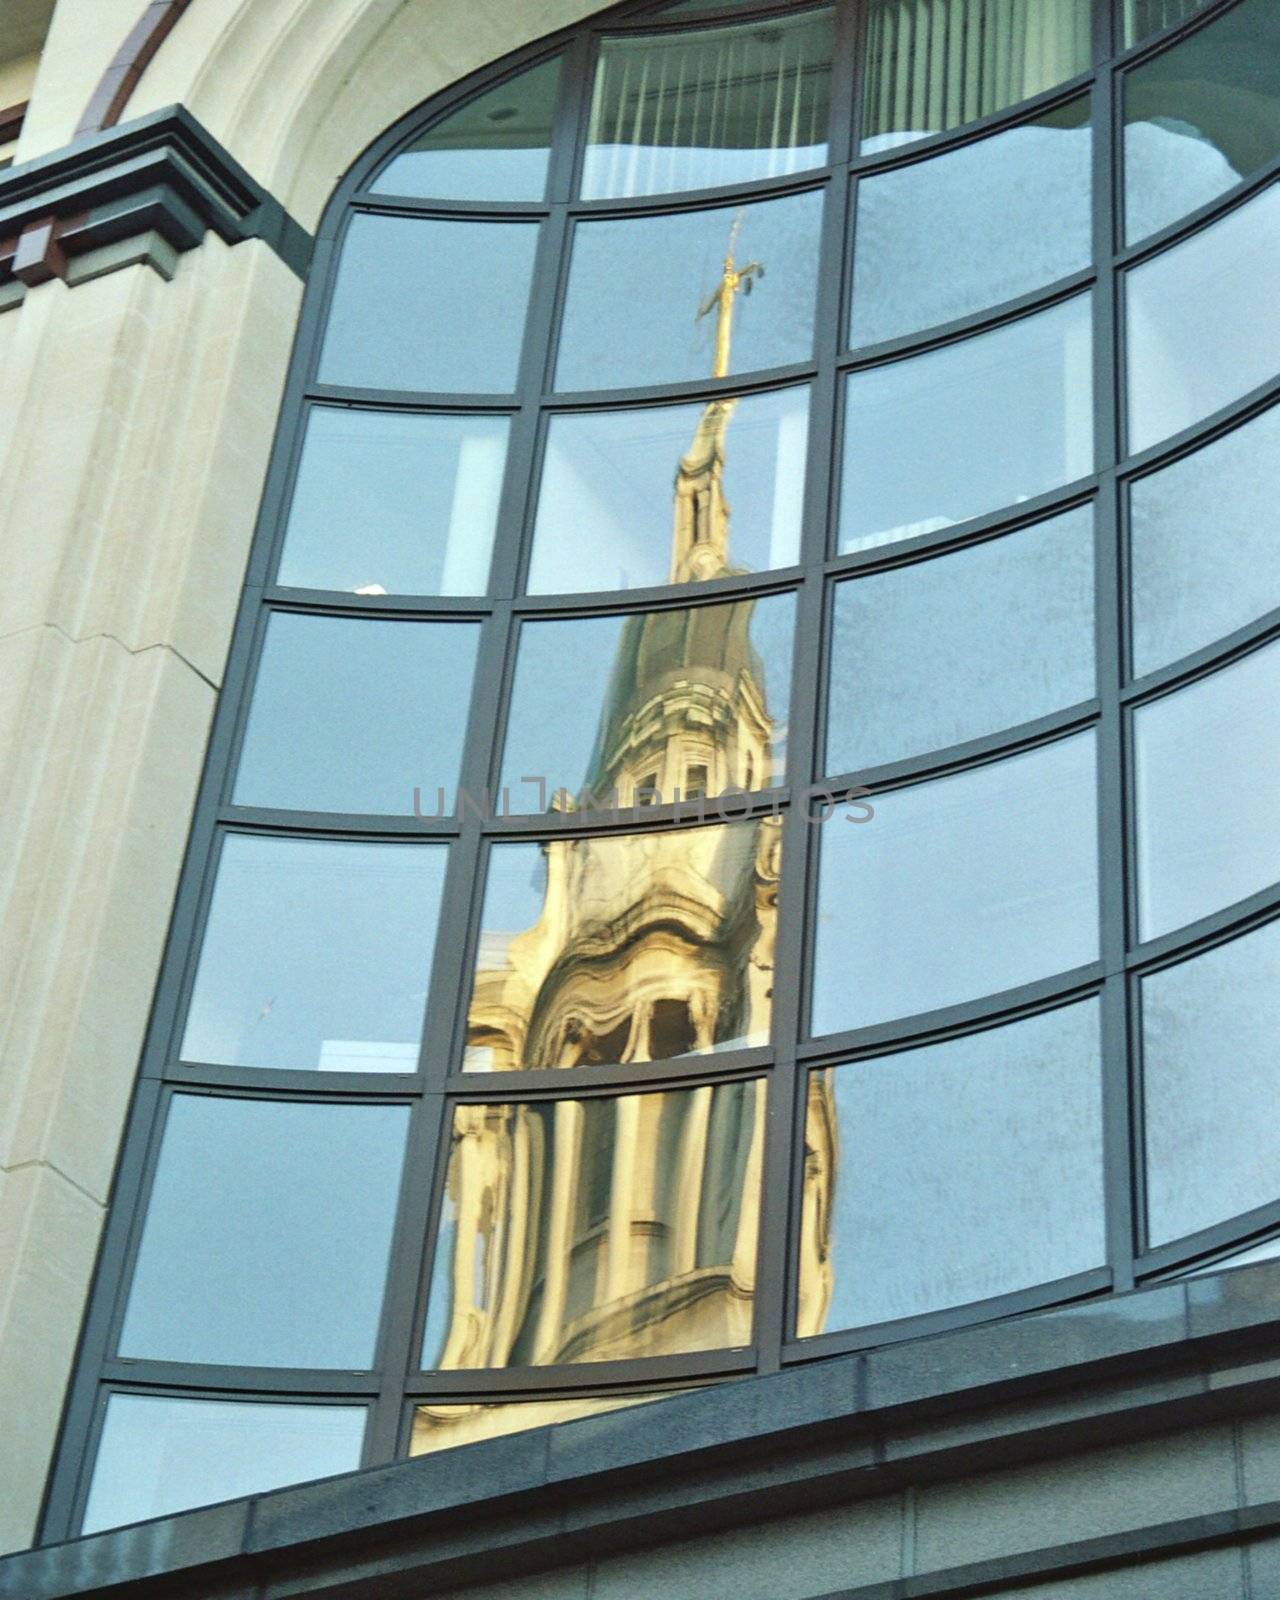 old bailey mirrored in newbailey, both are english criminal courts